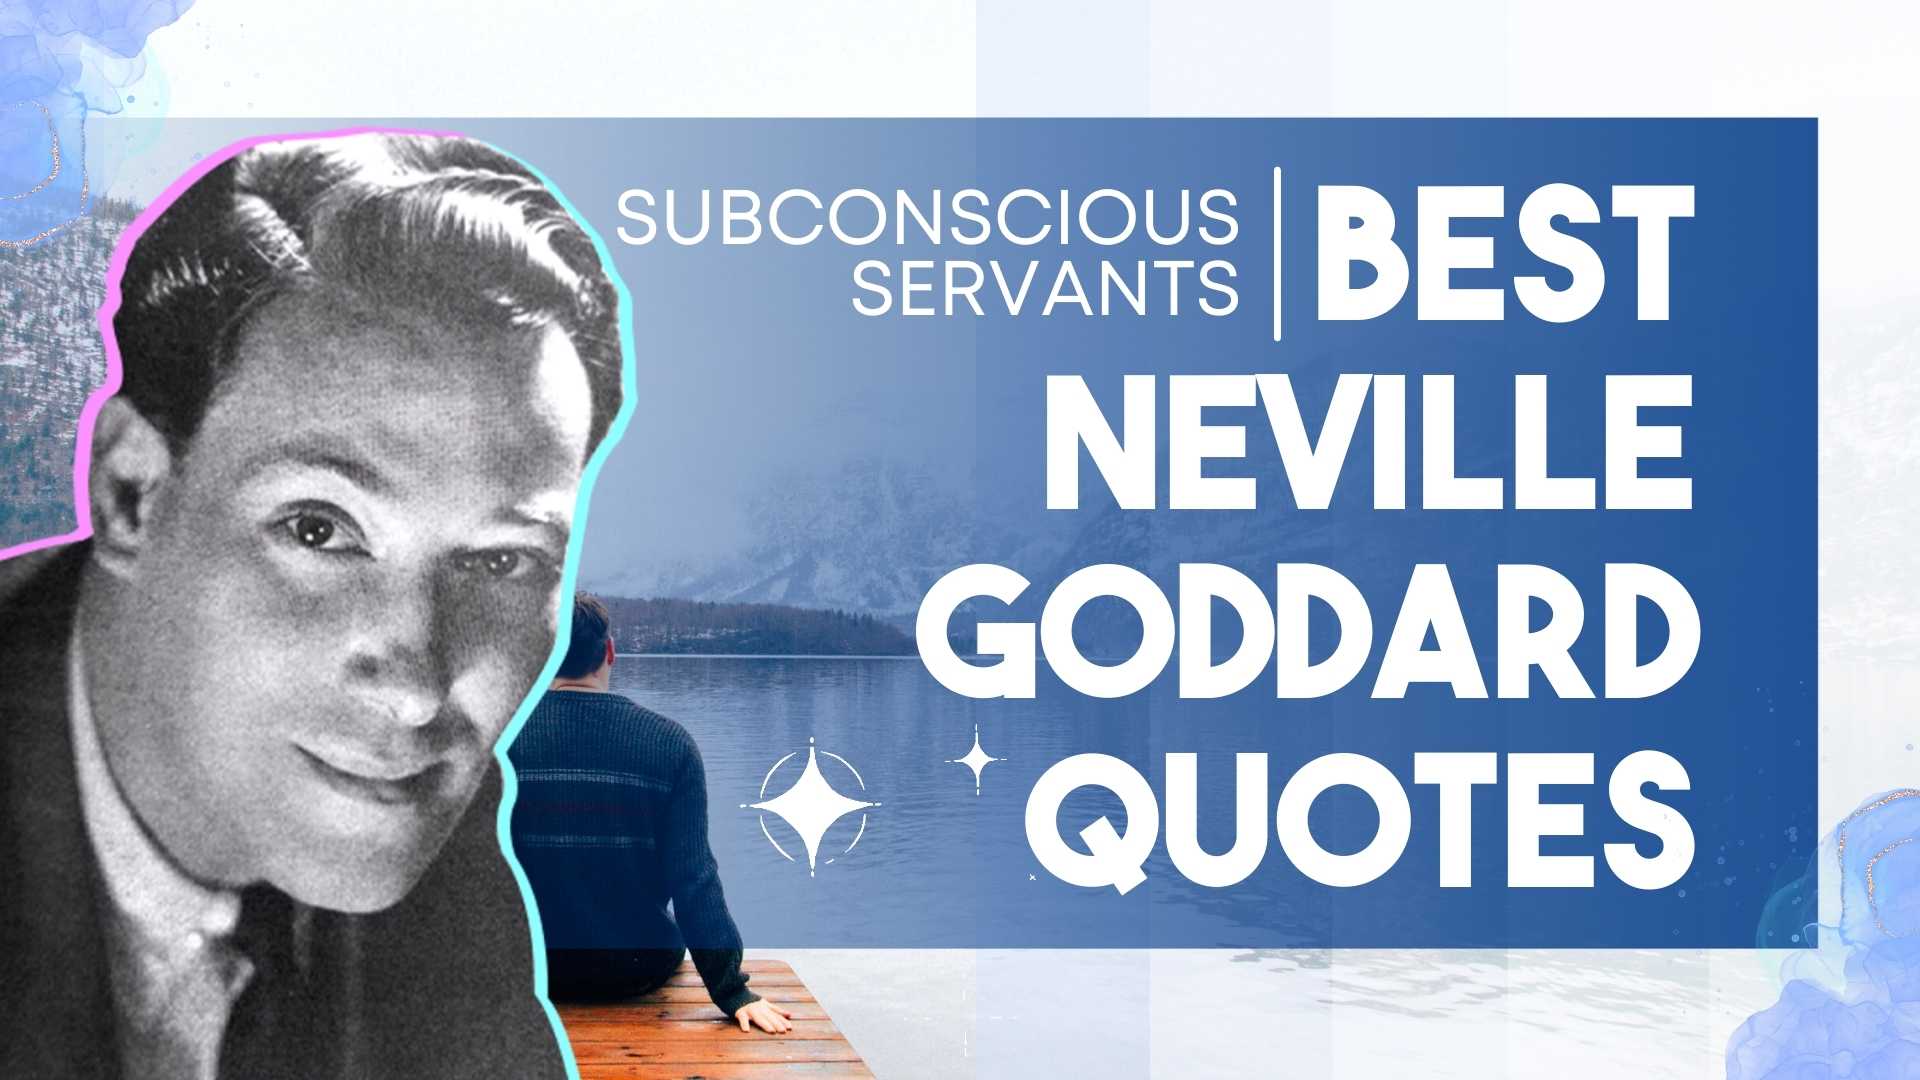 Image of Neville Goddard best quotes